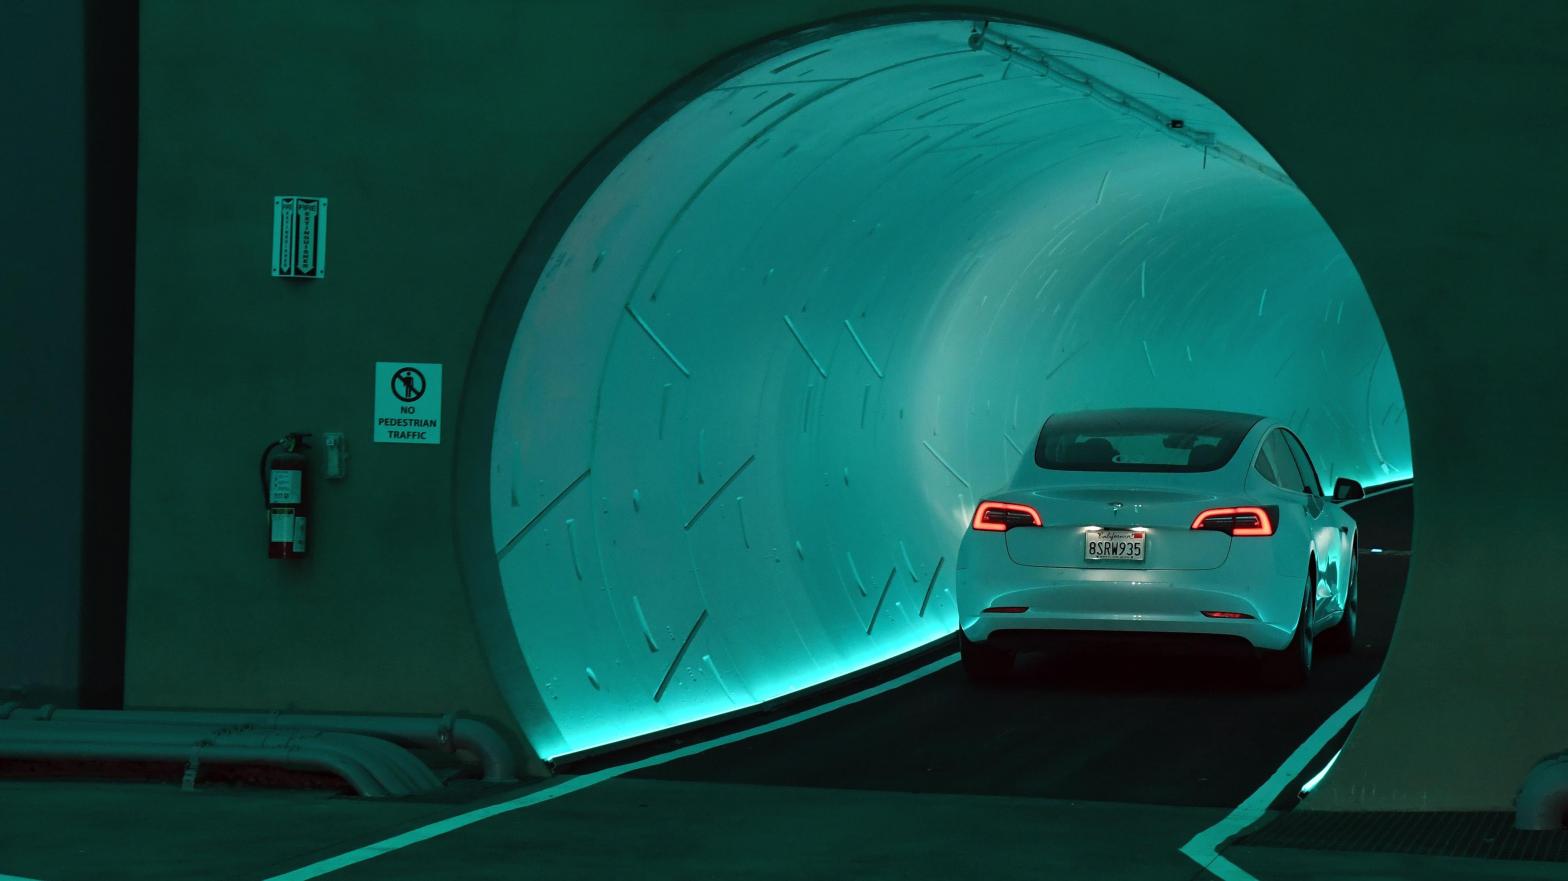 Elon Musk’s Boring Company Cited For Worker Safety Issues in Nevada